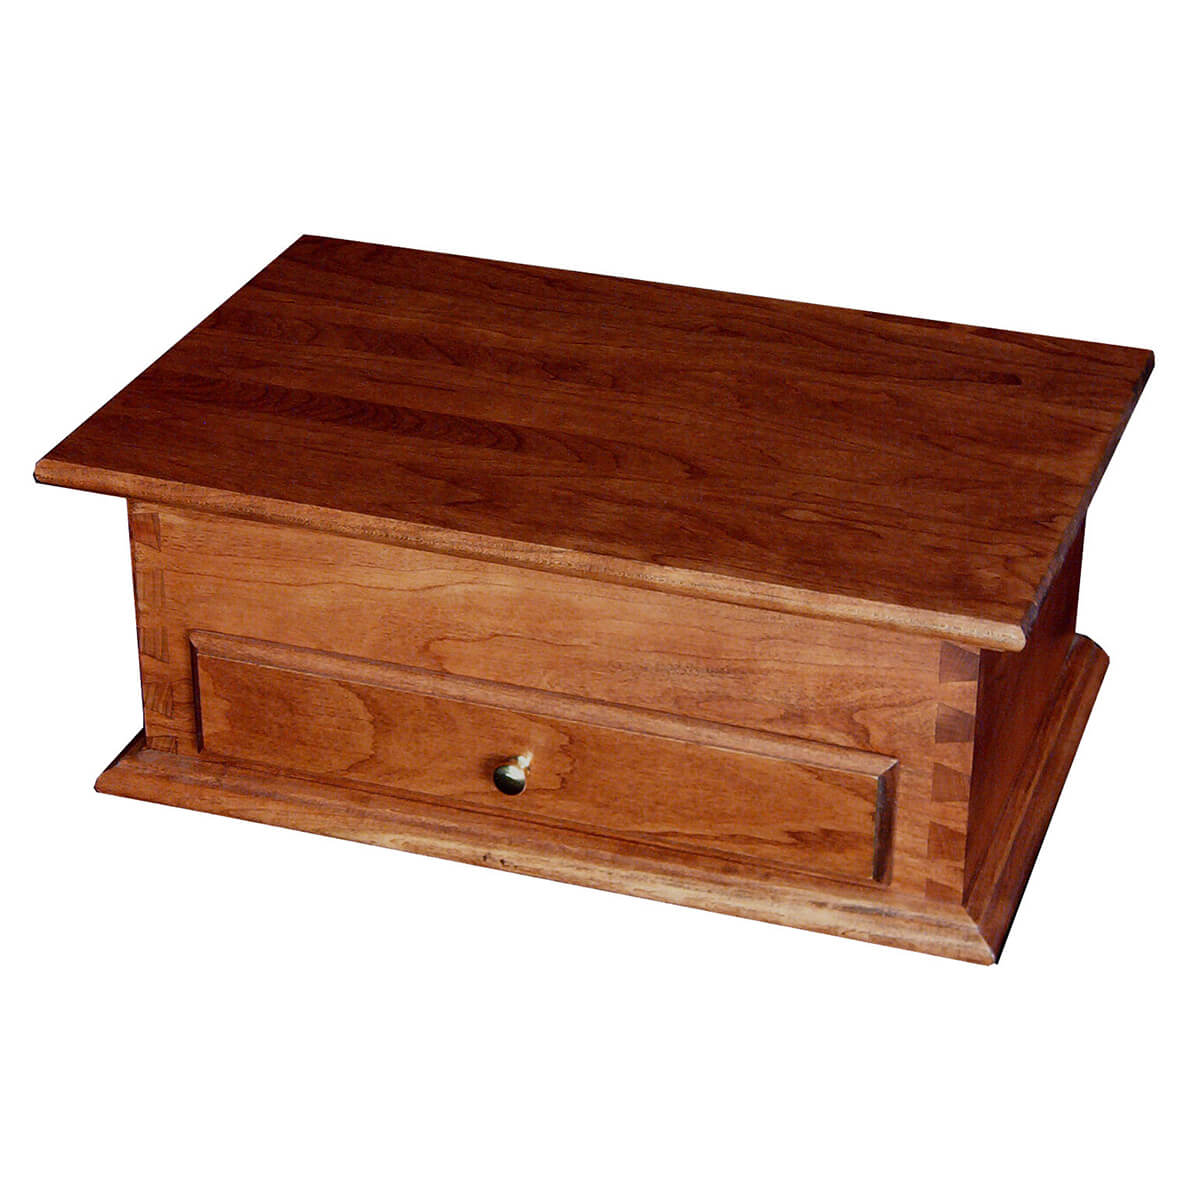 Read more about the article Standard Plain Lid Jewelry Box – Cherry